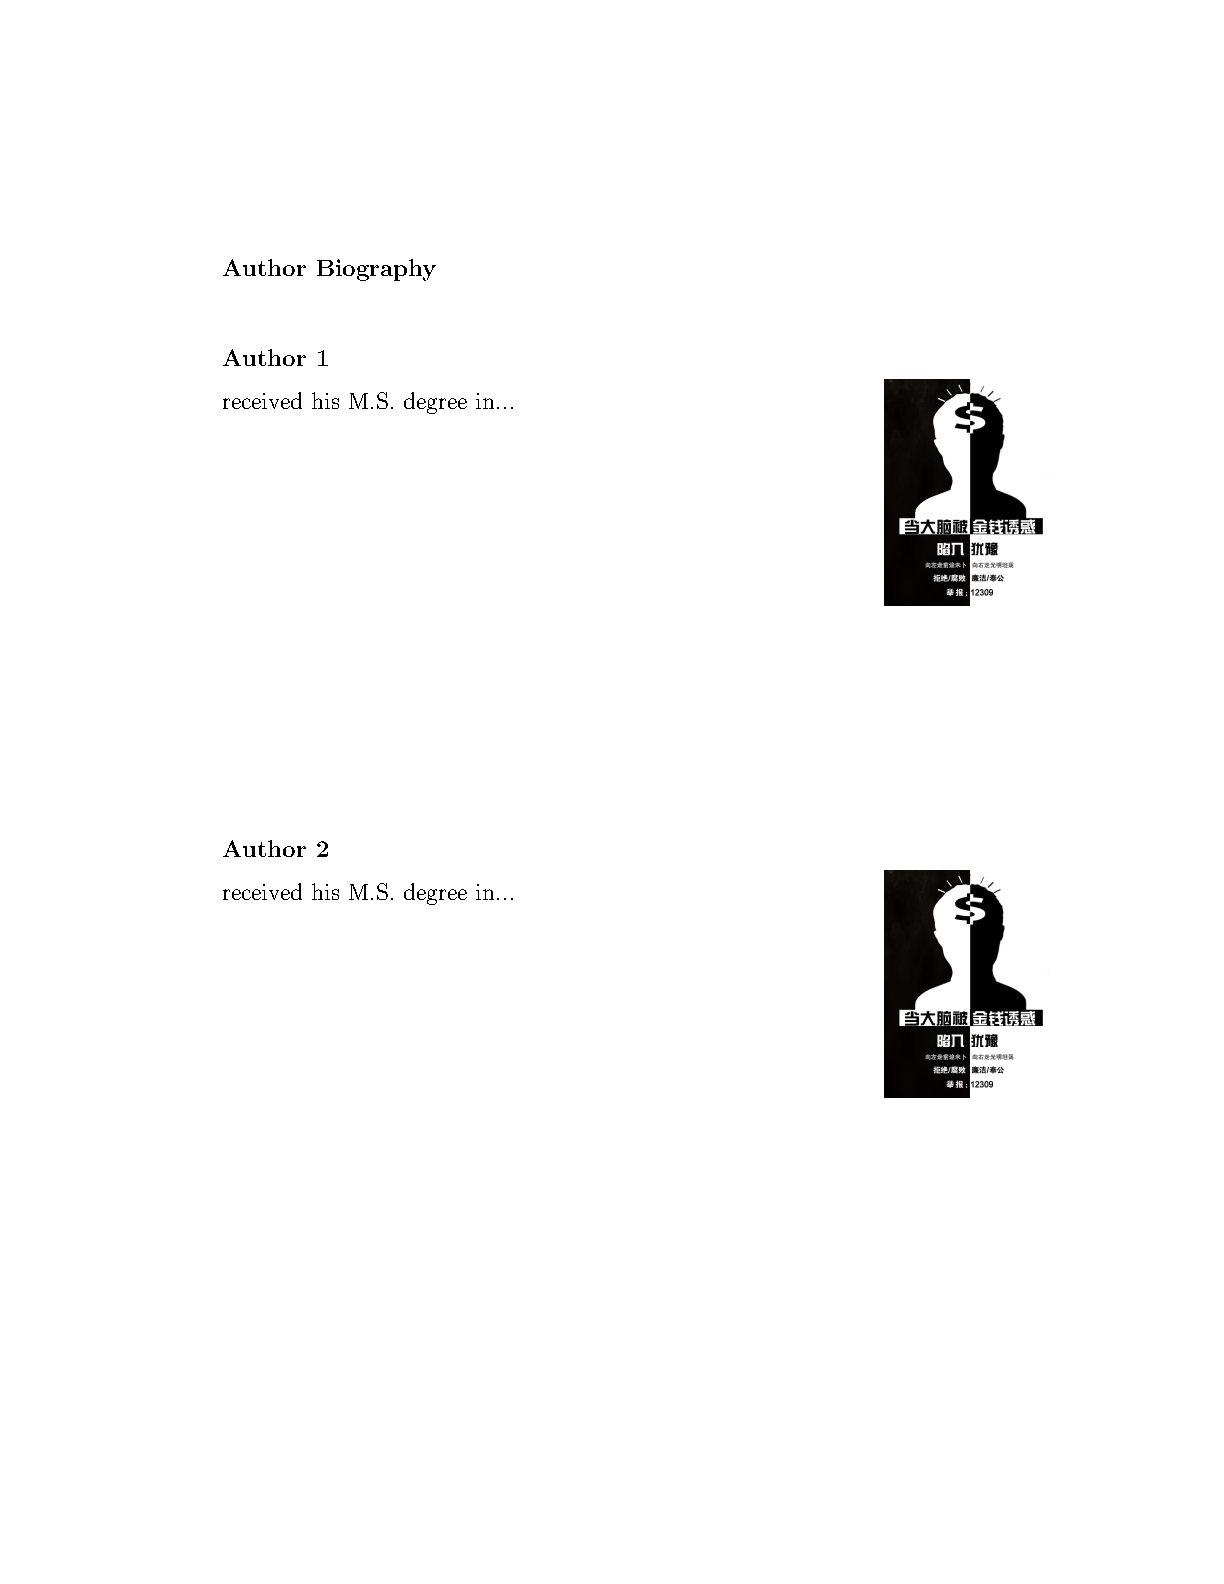 【LaTeX Template】Author Biography